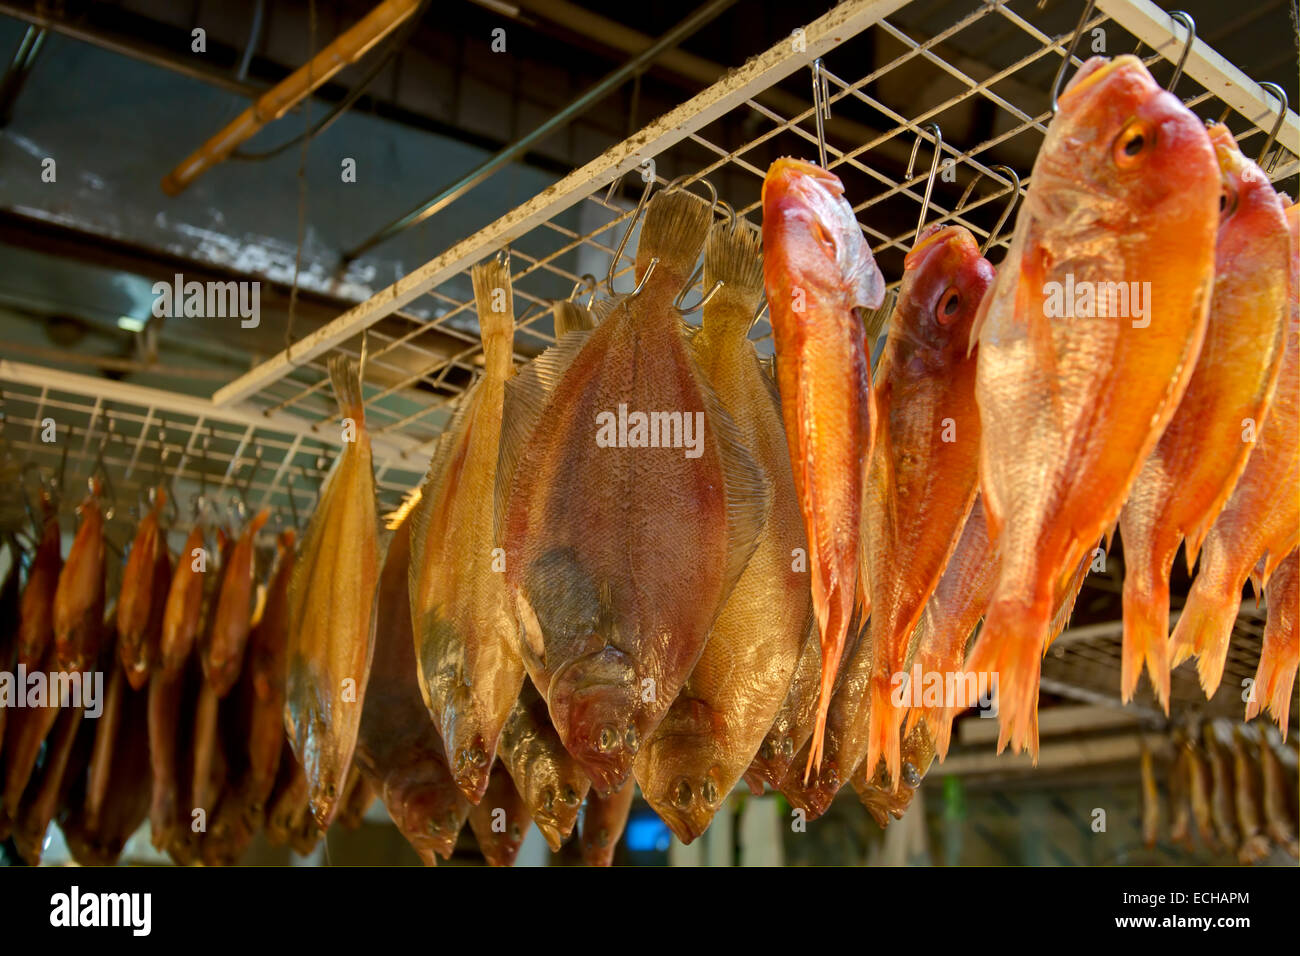 Dry fish in the market Stock Photo